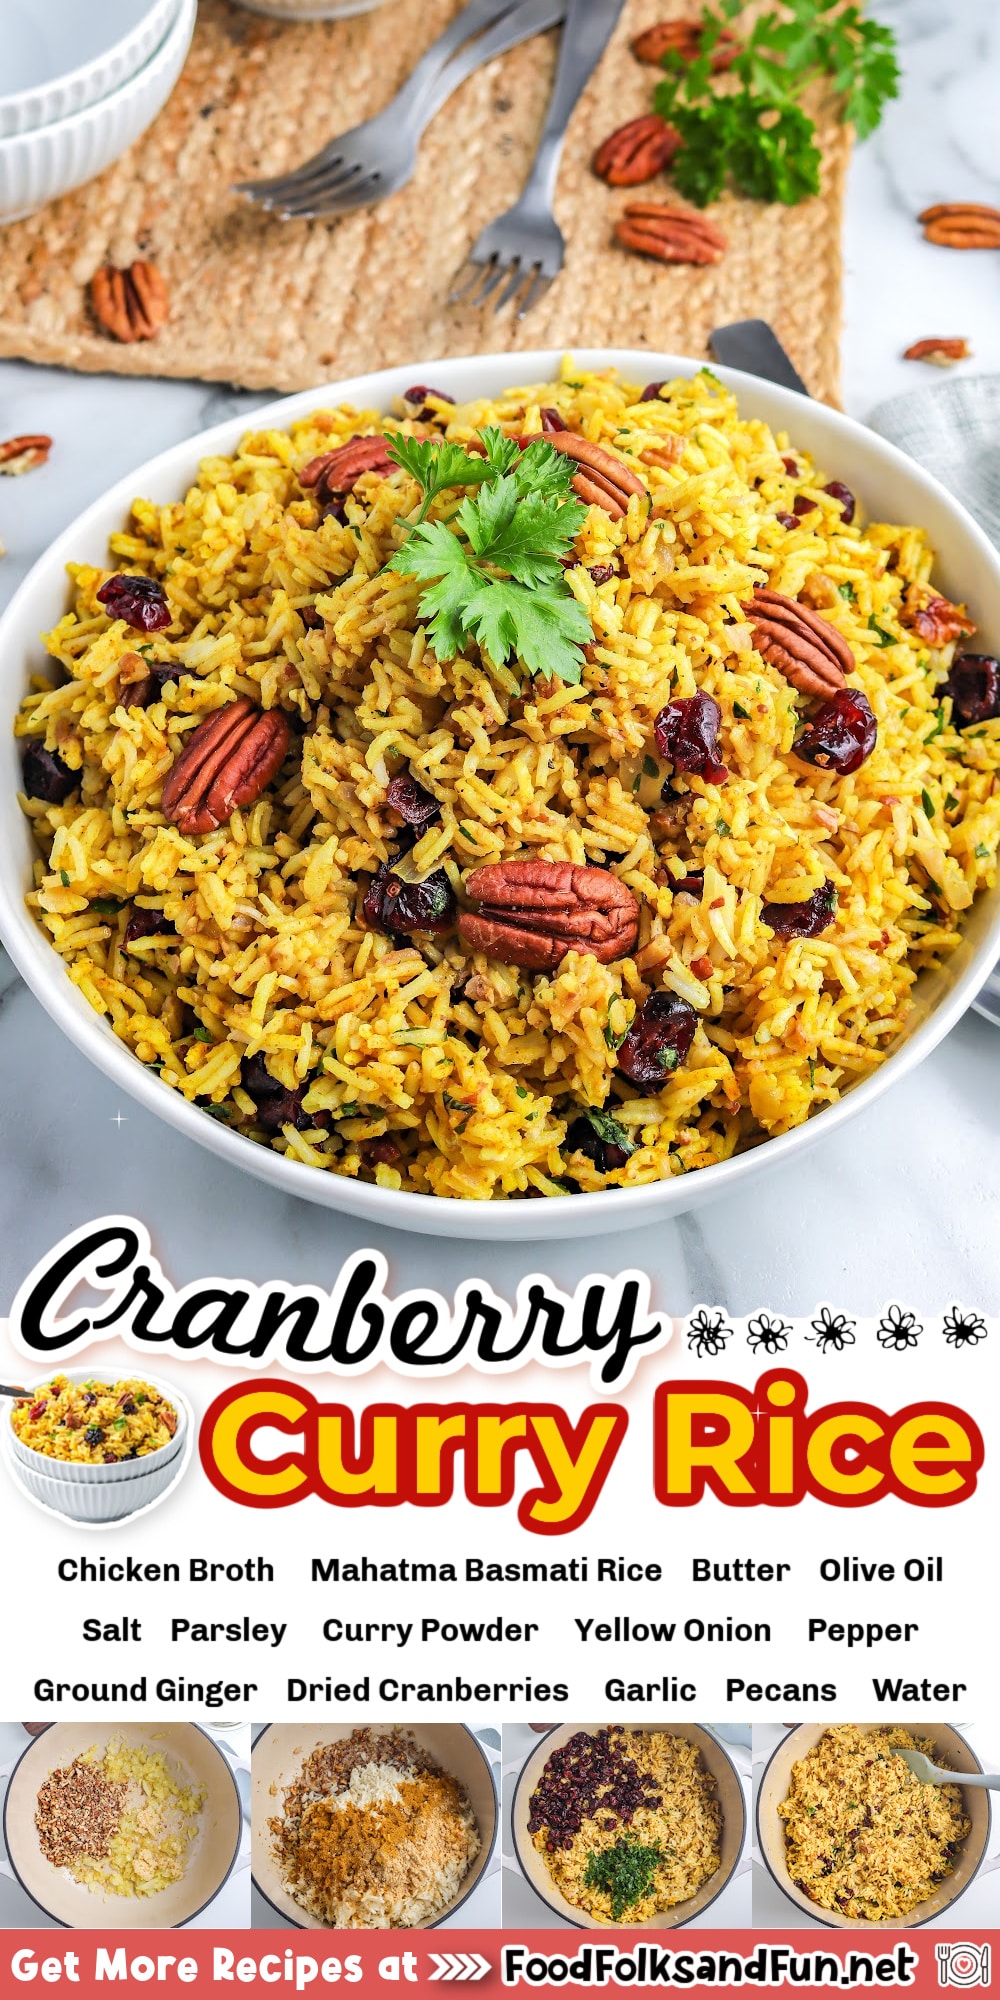 This curry rice recipe with cranberries and pecans is full of fall flavors! It’s a soul-warming curry that’s wonderful for a weeknight dinner or Thanksgiving!
 via @foodfolksandfun